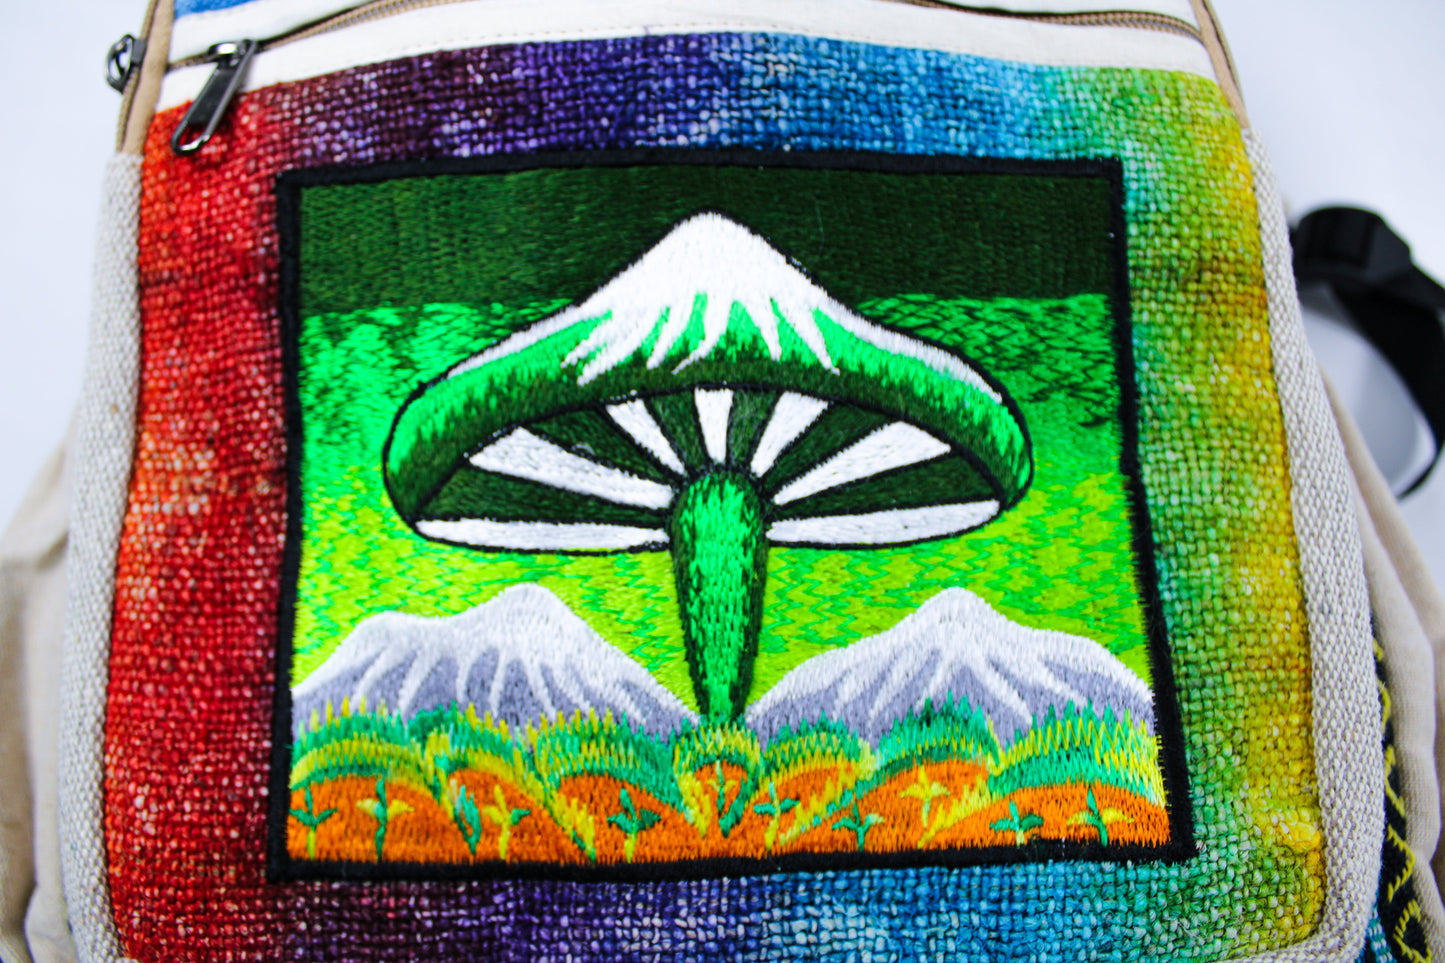 Full-size hemp backpack, beautifully embroidered with a serene mountain valley and whimsical mushroom